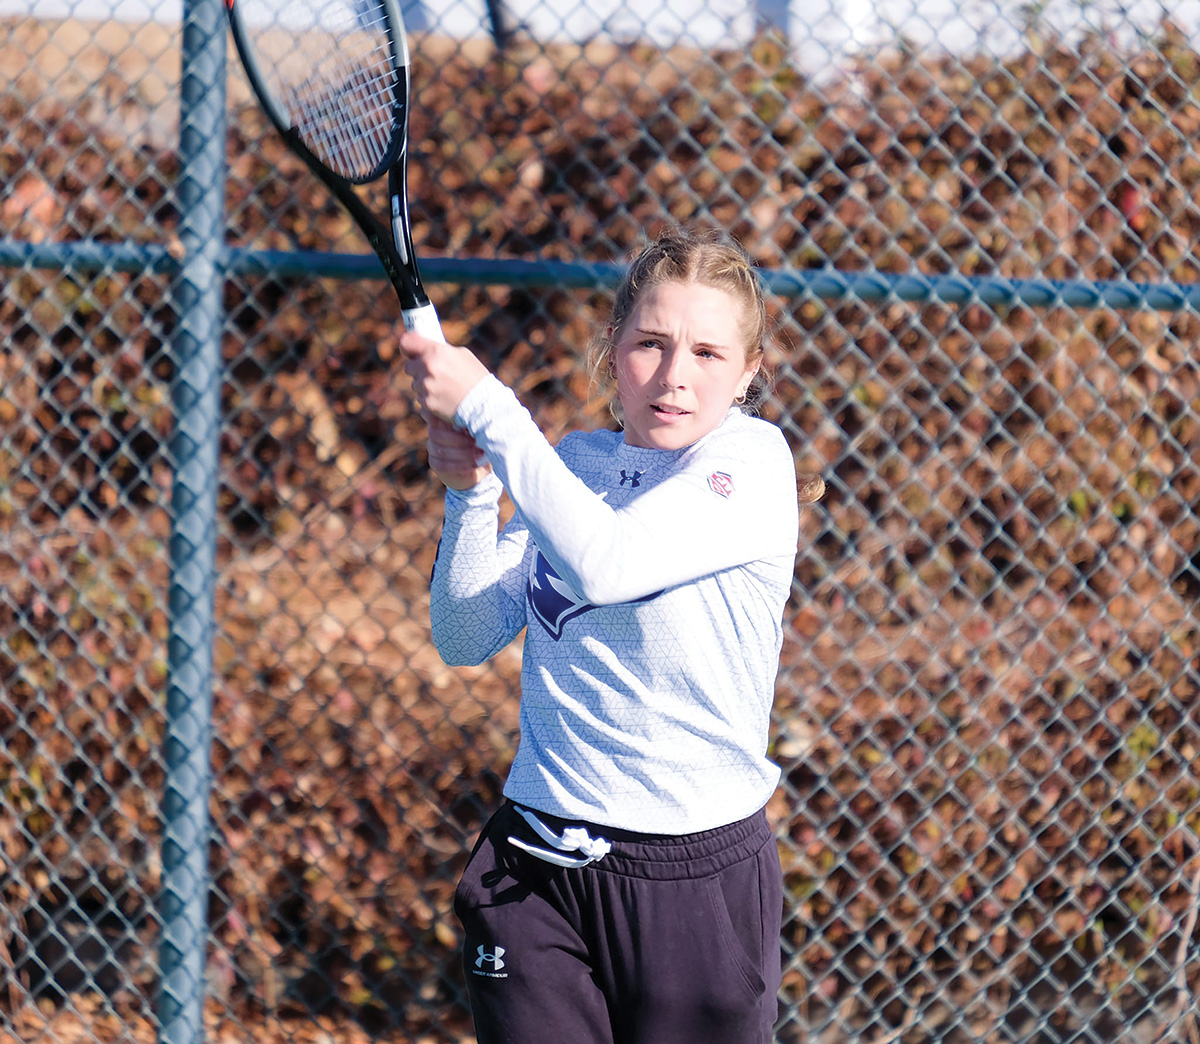 UNKs Clare Plachy was named MIAA womens tennis athlete of the week earlier this season after returning from an injury. Courtesy Photo